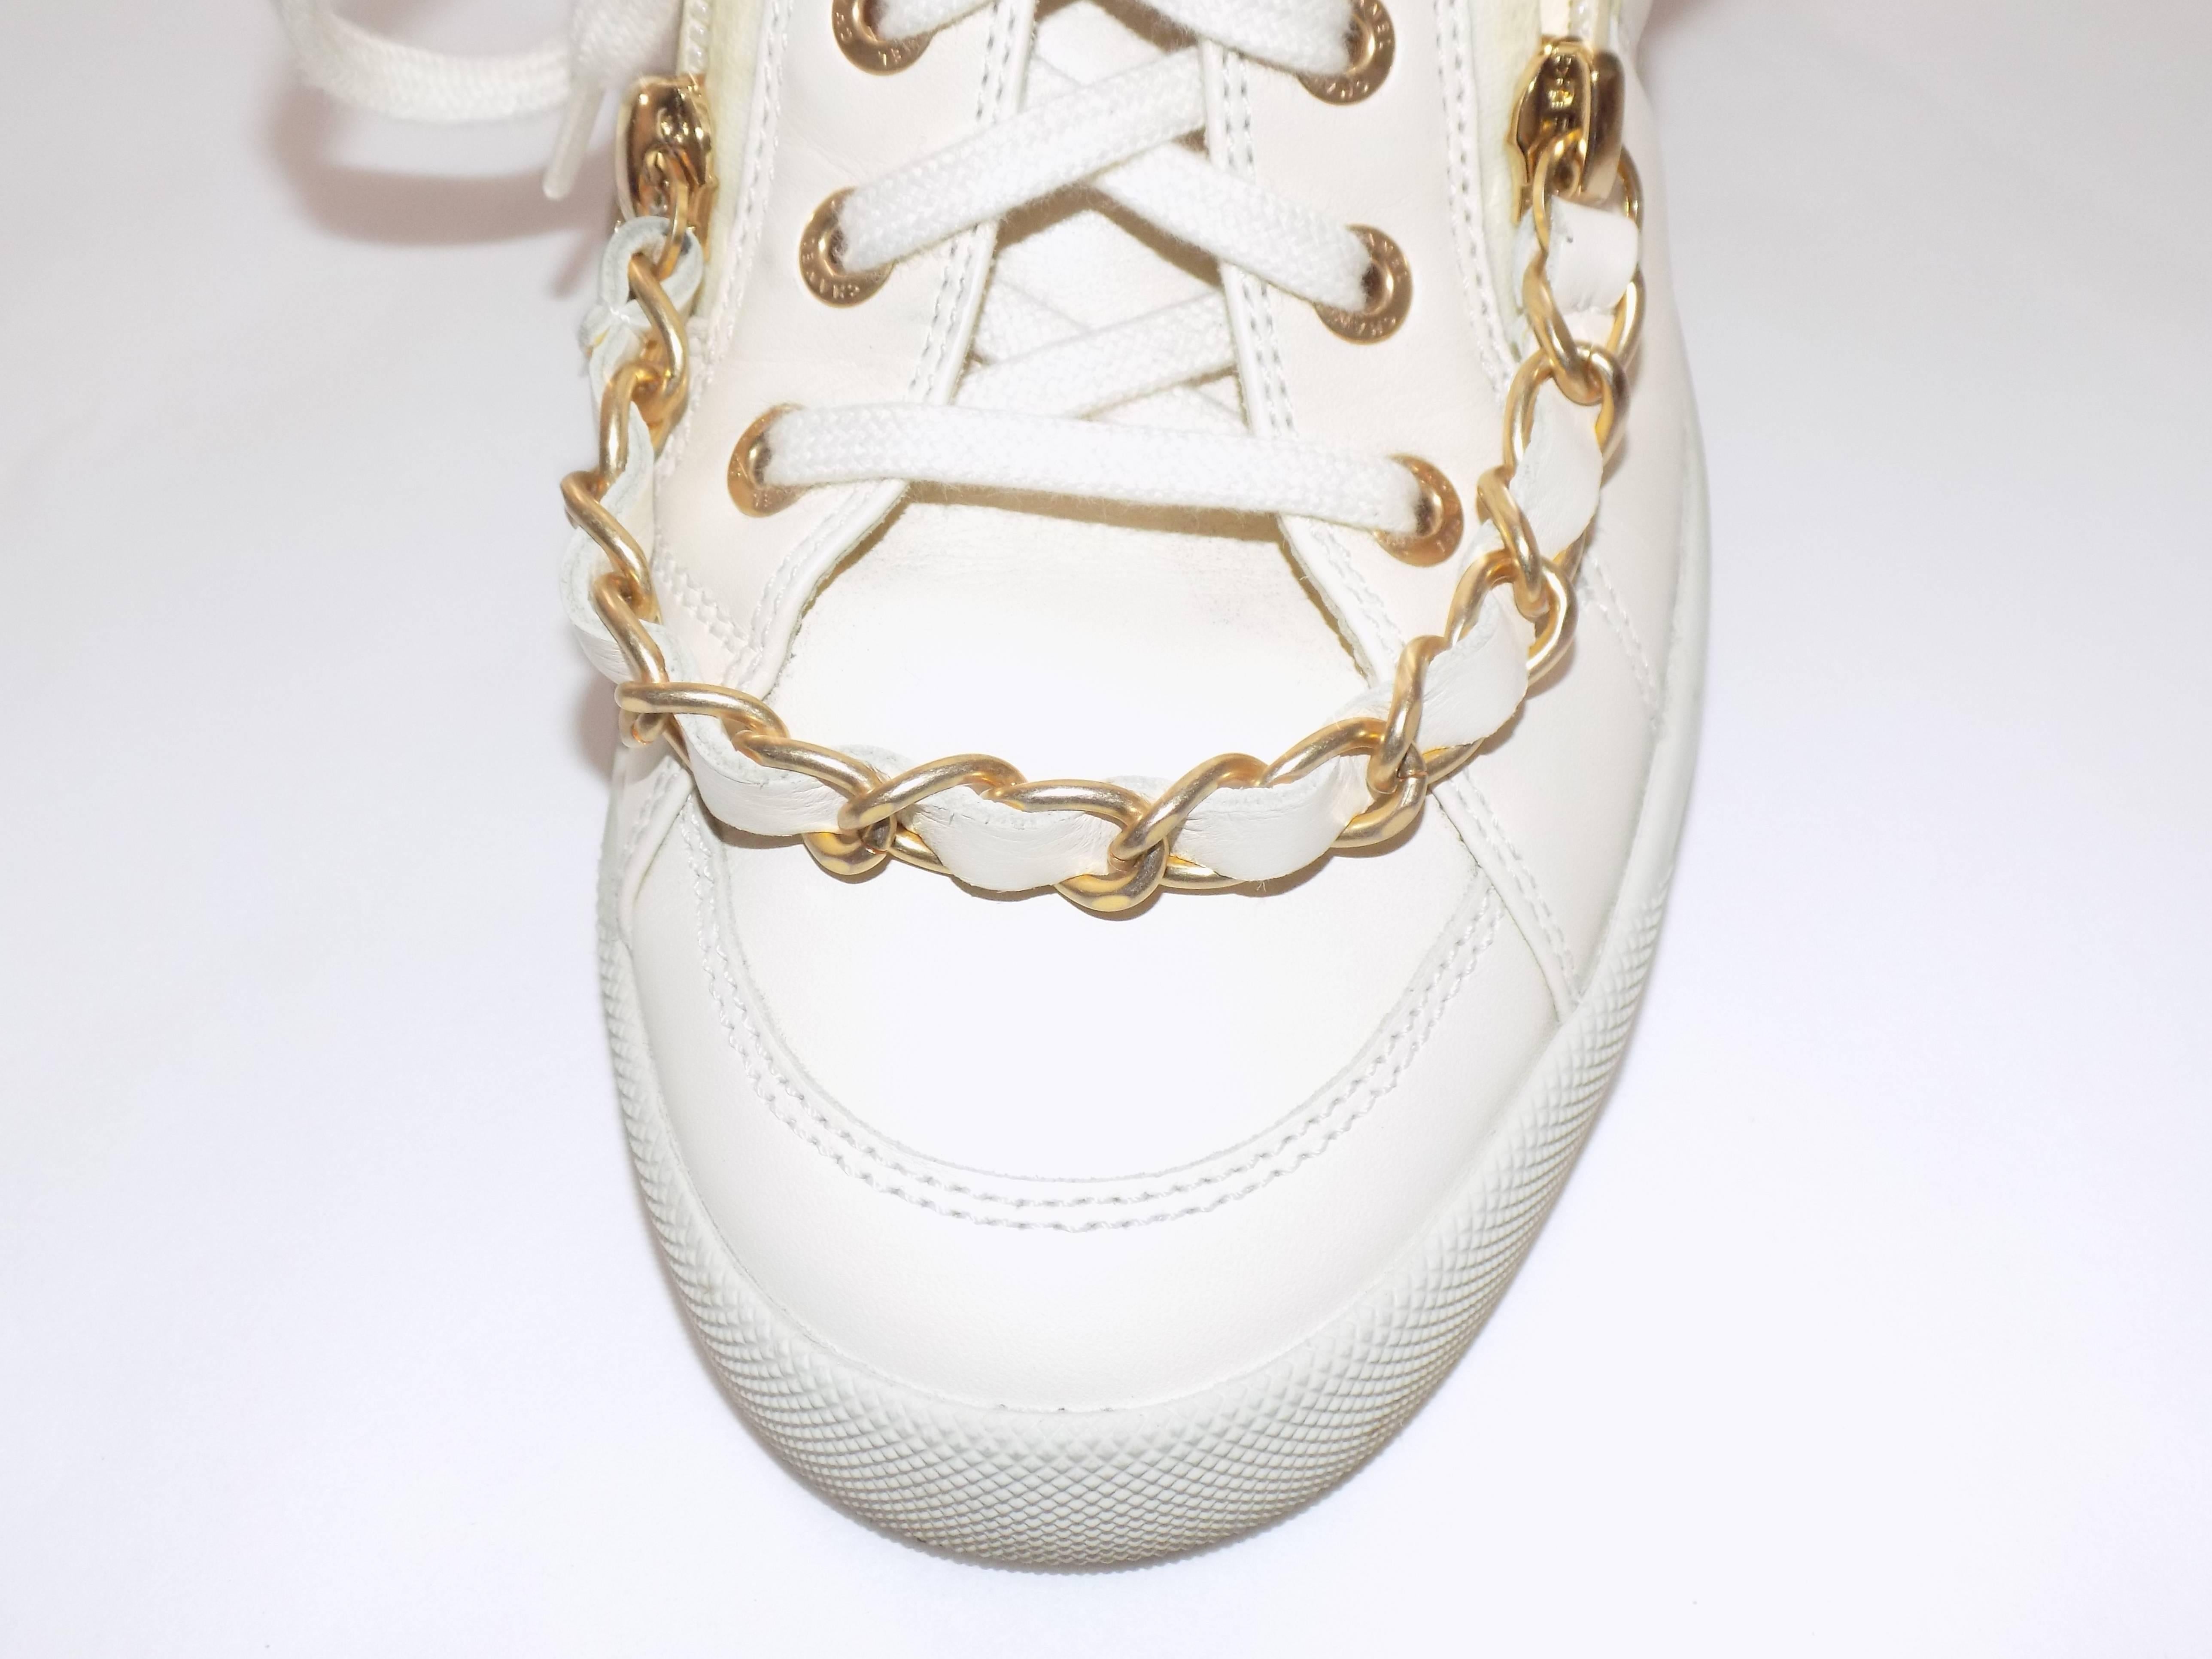 Women's  Chanel 37.5   High Top Sneakers shoes  with  Chain winter white